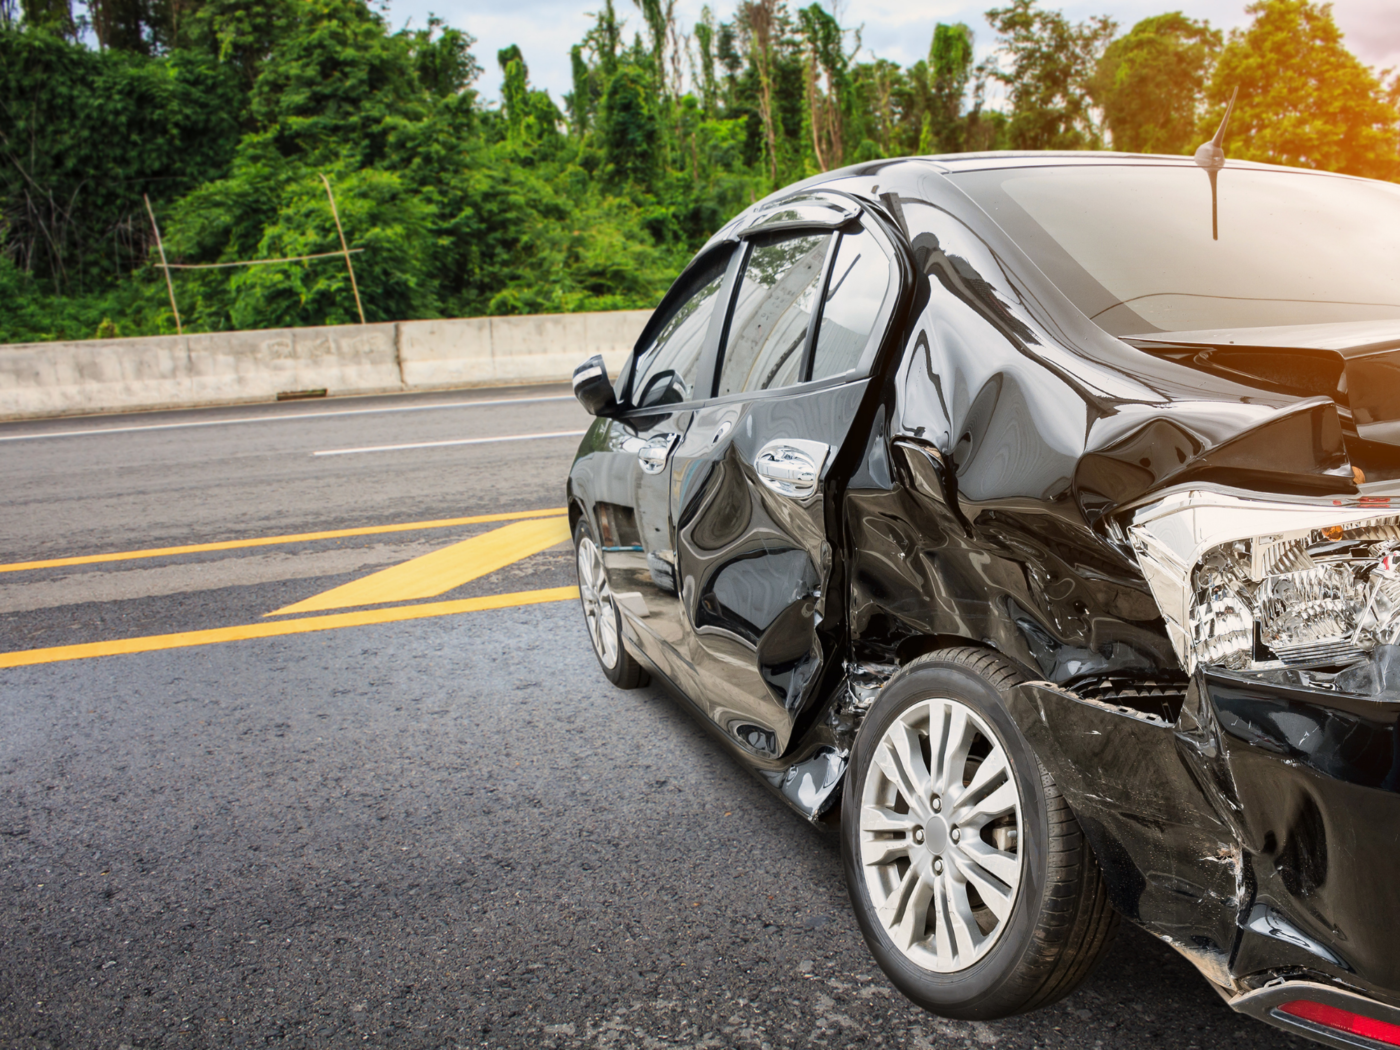 Damaged car with a crushed side panel on a road, depicting the aftermath of a vehicle collision which can often result in traumatic brain injuries.